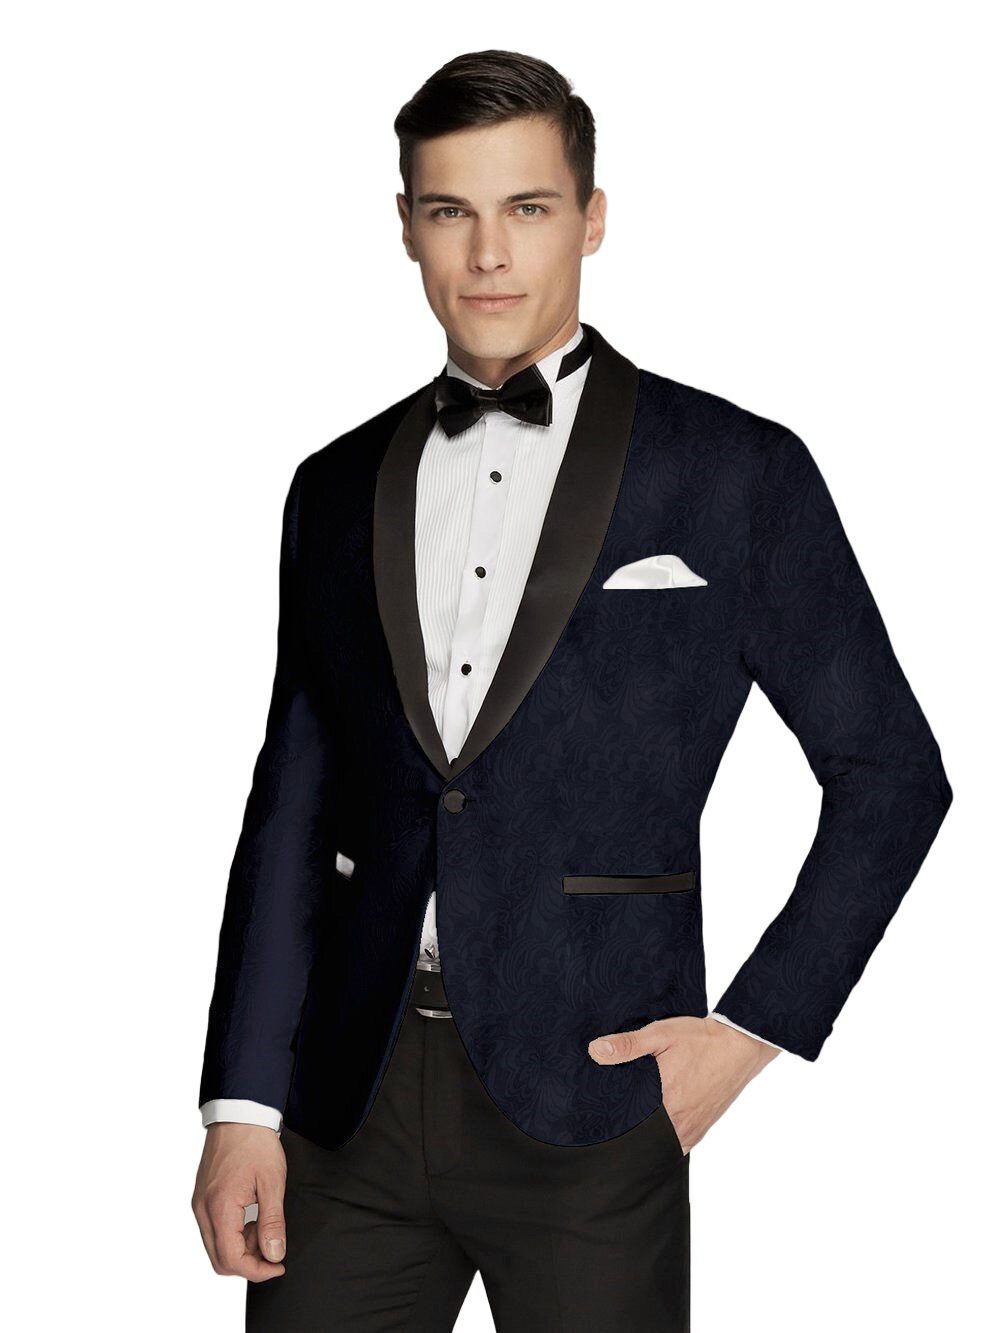 Floral Patterned Navy Tuxedo